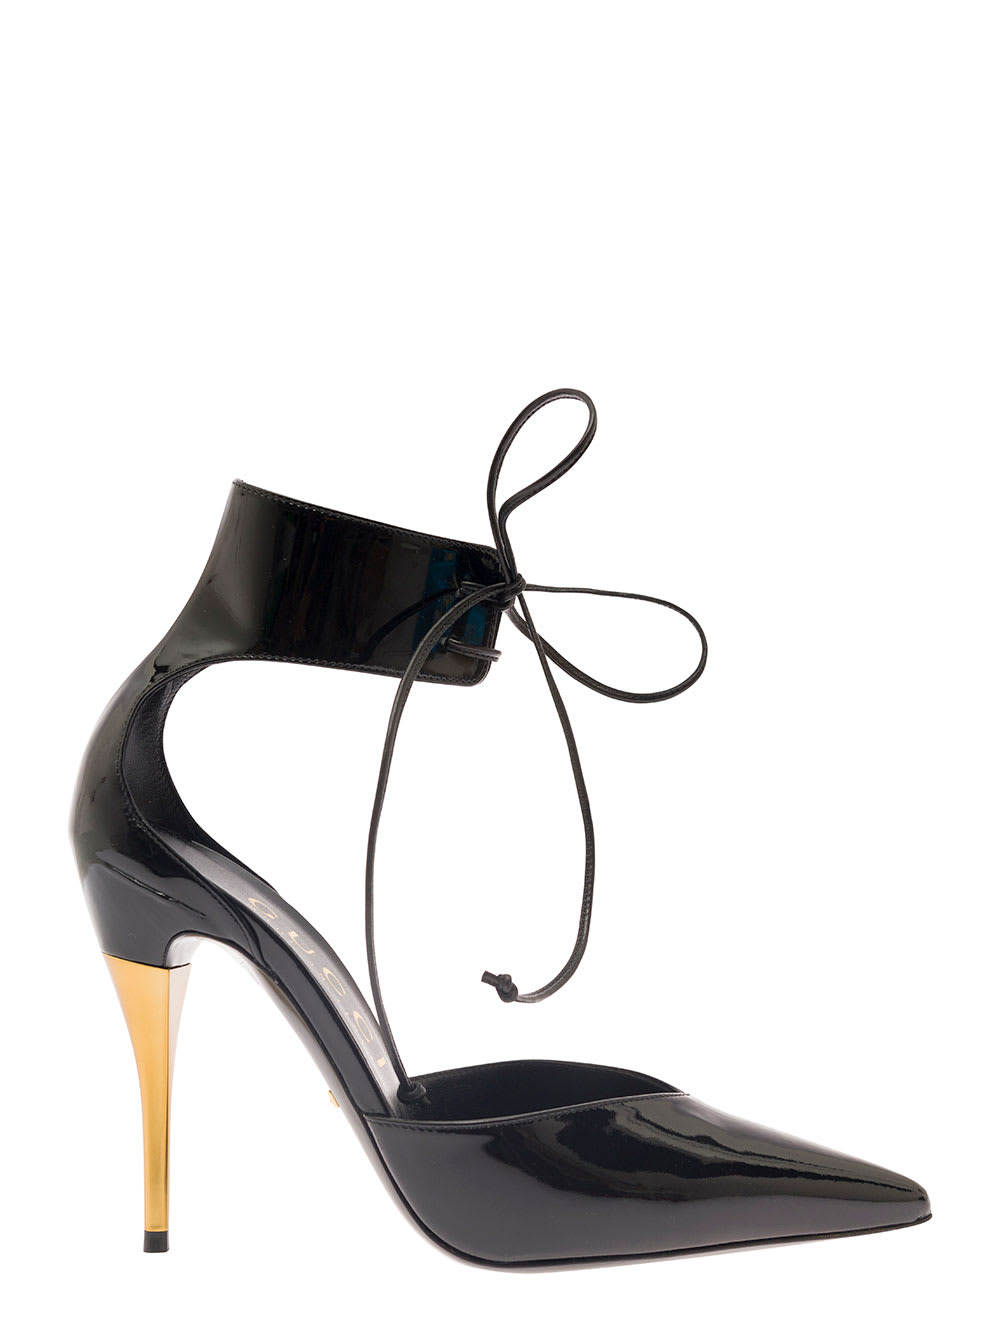 GUCCI PRISCILLA BLACK PUMP WITH ANKLE CUFF AND METAL EFFECT HEEL IN PATENT LEATHER WOMAN